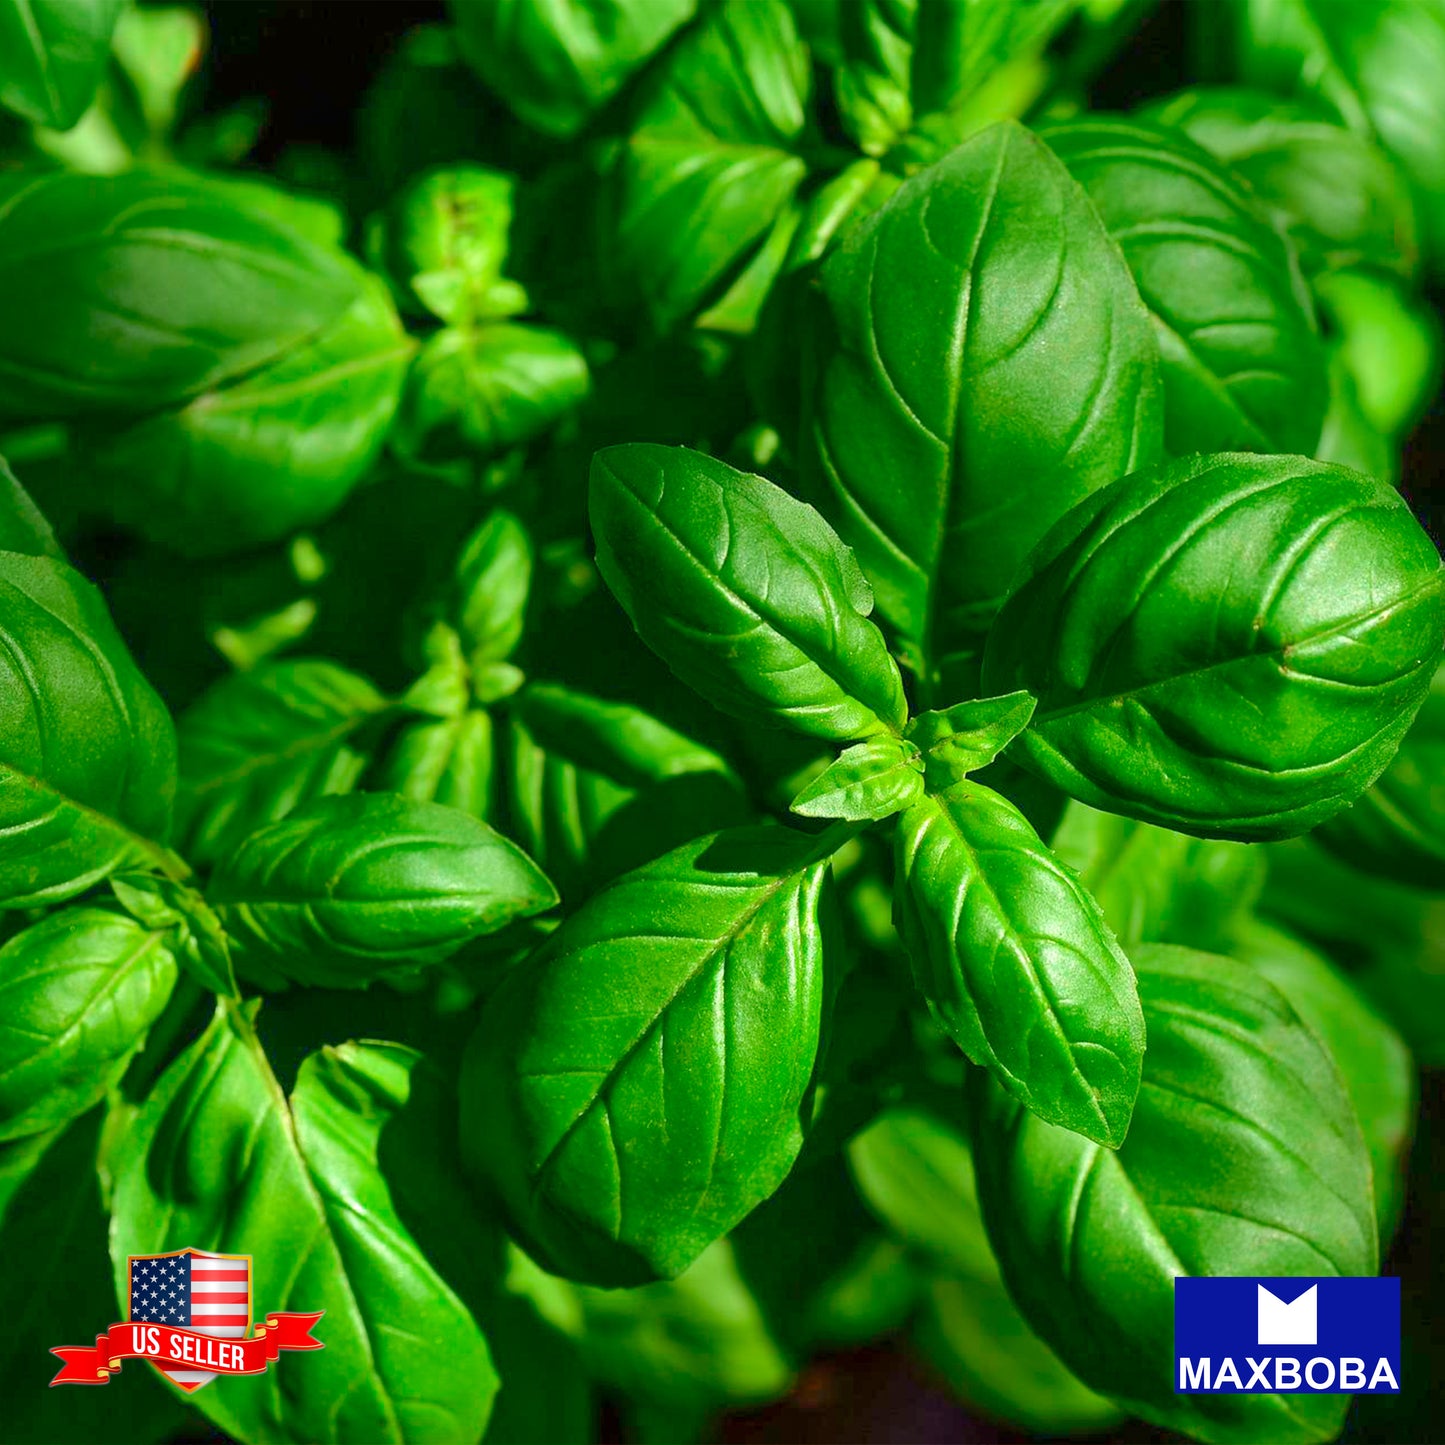 Basil Seeds - Italian Large Leaf Non-GMO /Heirloom /Open Pollinated /Herb Garden